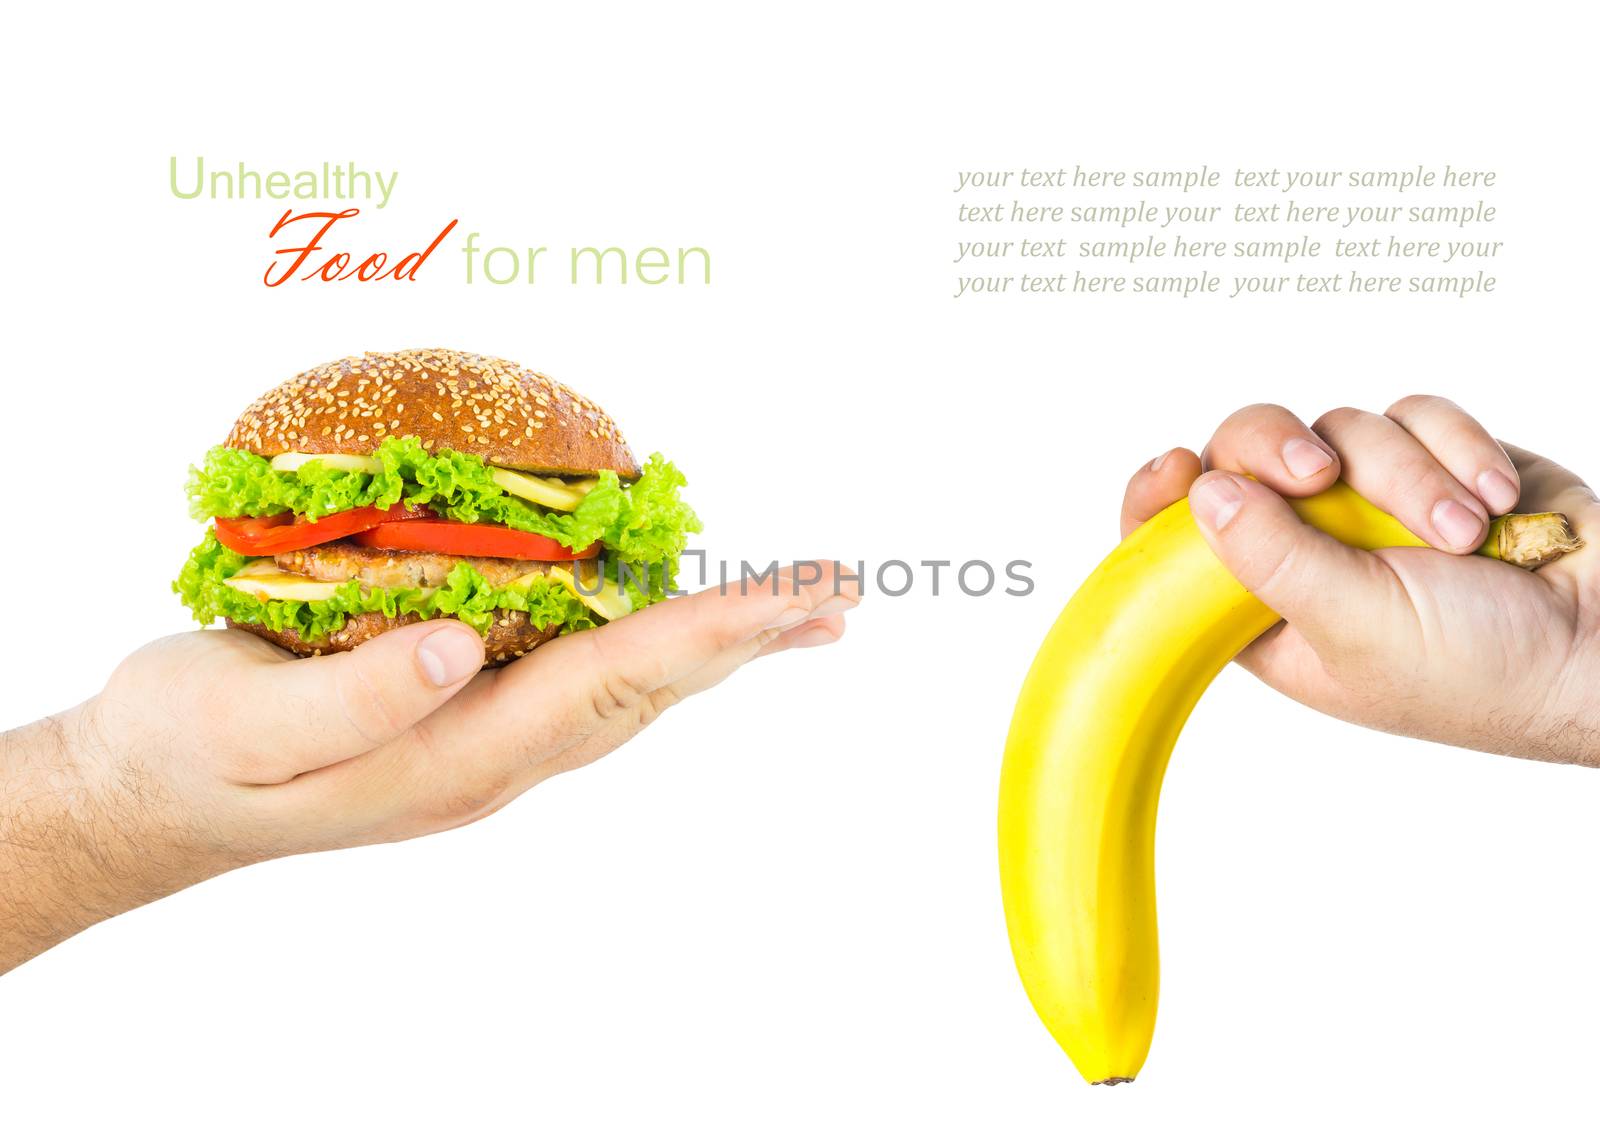 Concept. Unhealthy junk food for male sexual potency. A man's hand holding a burger, the other man's hand holding a banana like a big penis upside down that symbolizes lack of erection and impotence